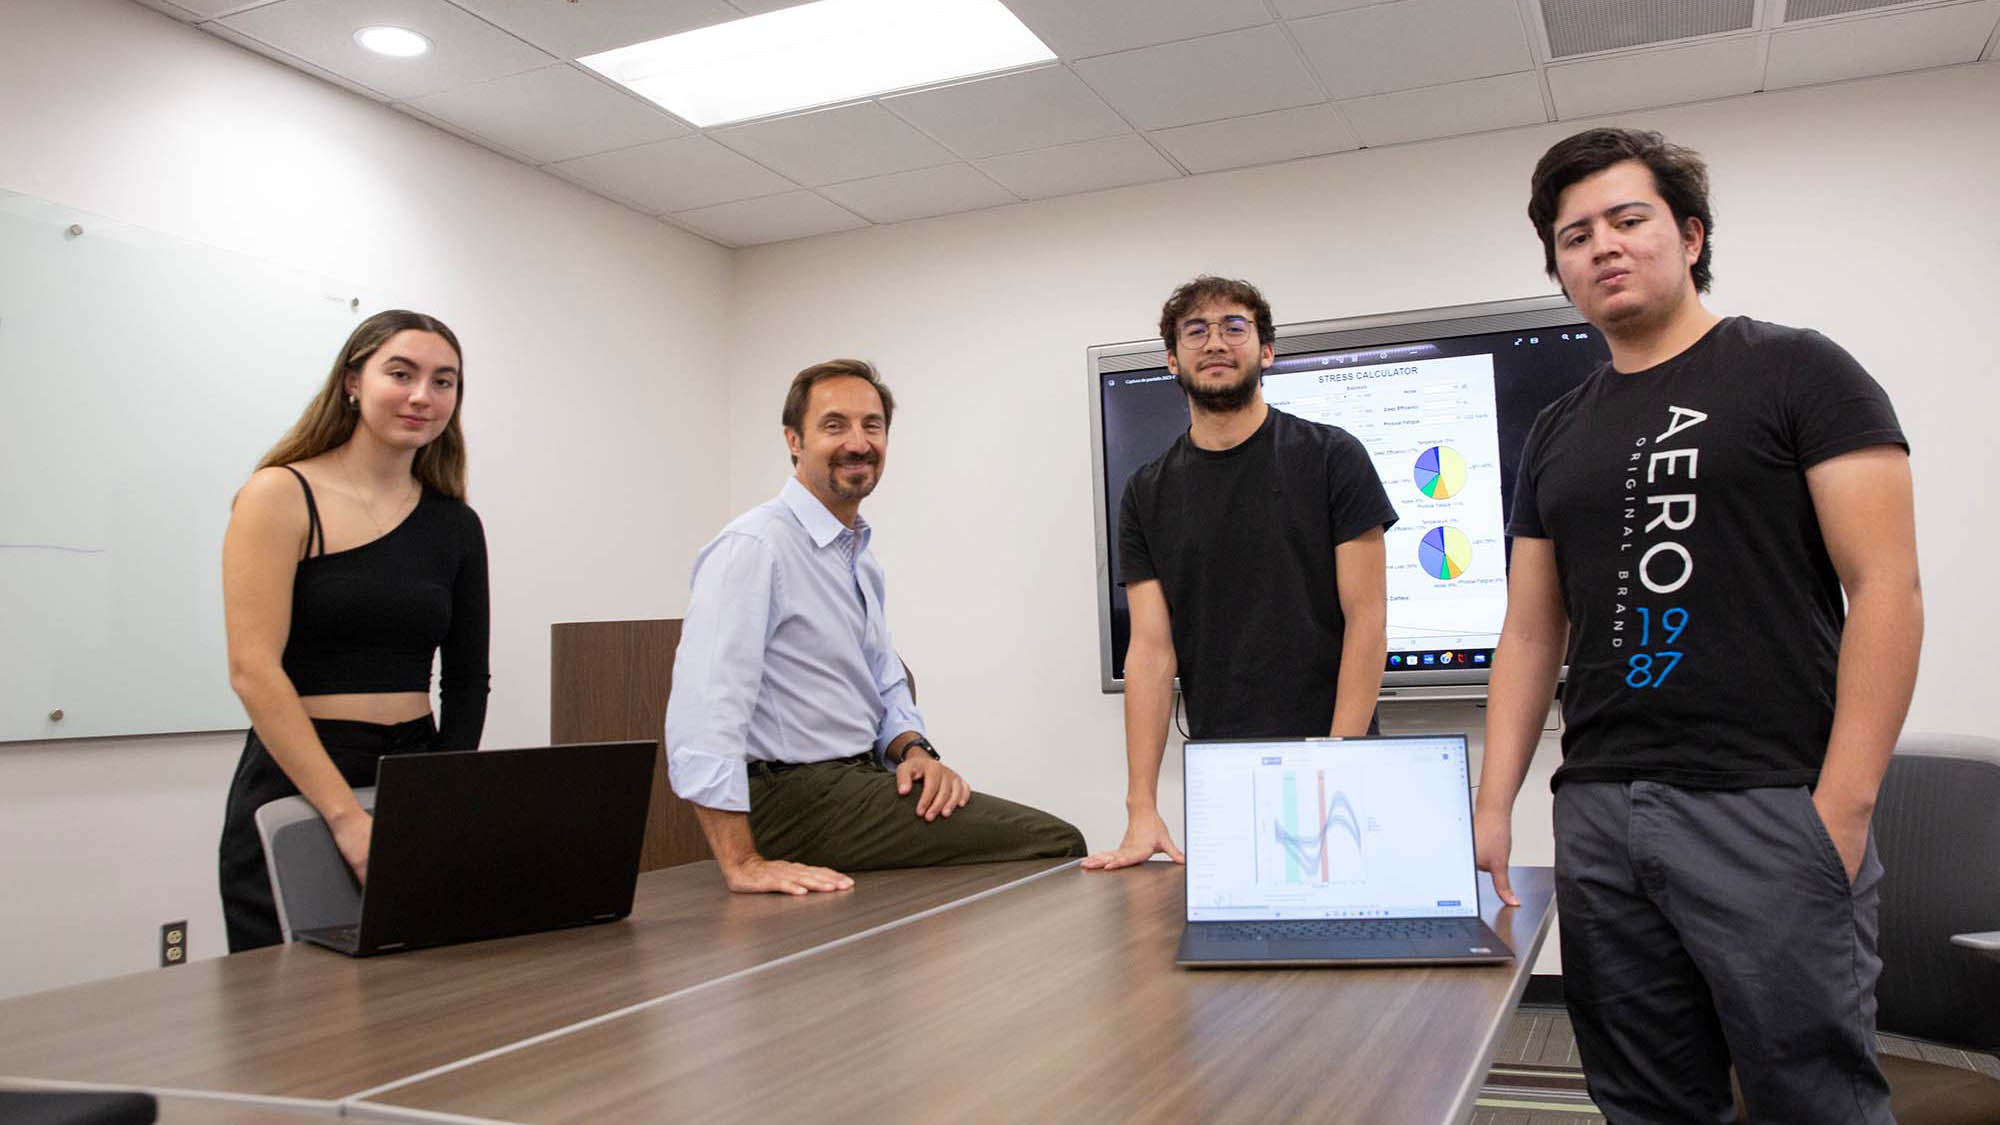 Three students and their professor pose around a conference room table with their data figures displayed behind on a screen (indistinguishable) and a laptop computer screen (indistinguishable in foreground)